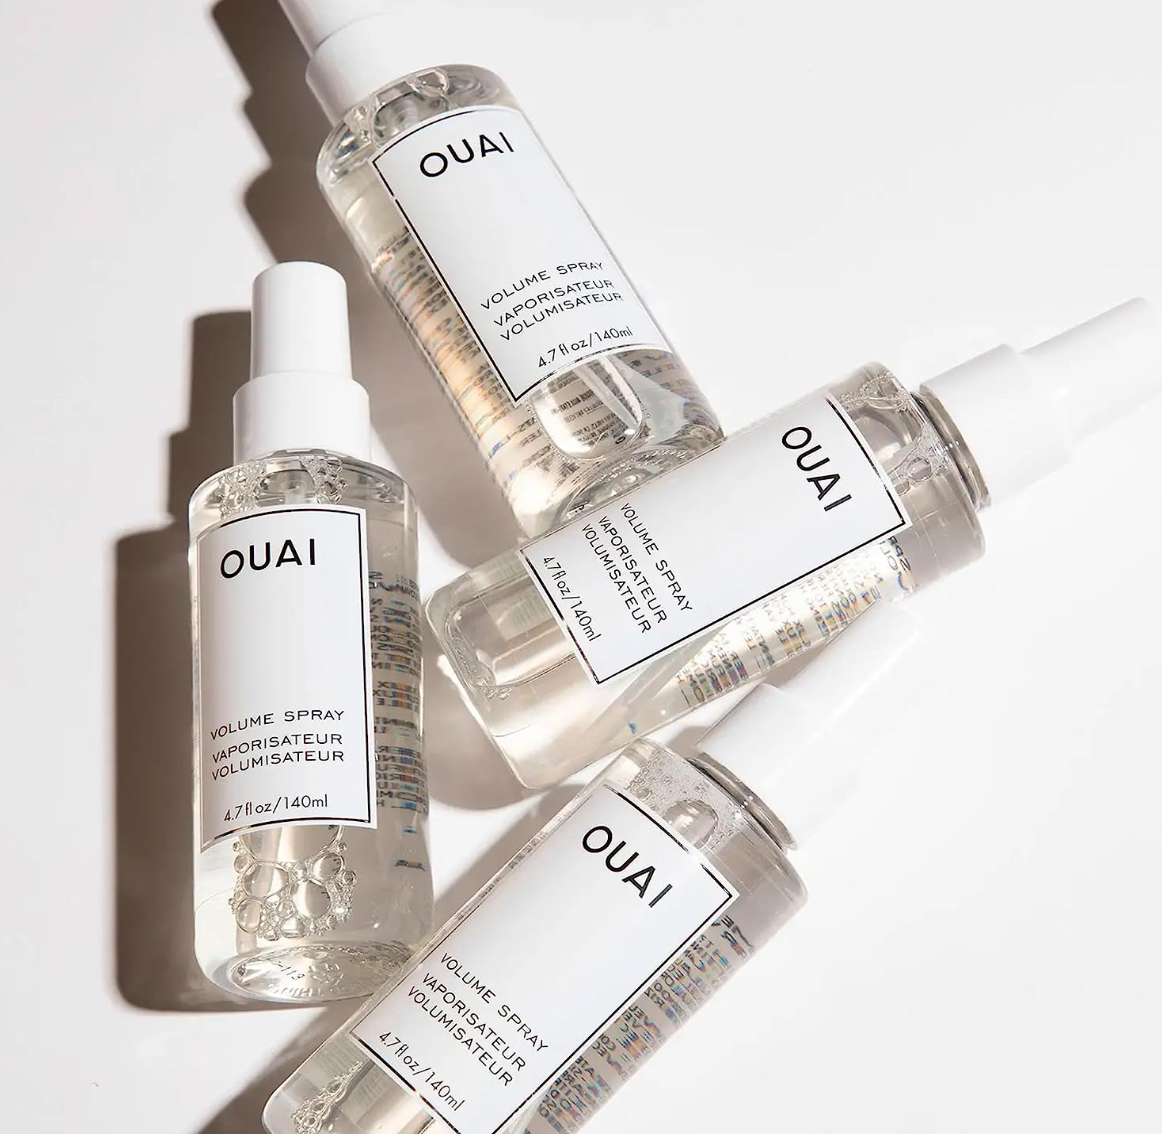 OUAI Volume Spray. A Weightless, Pre-Blowout Mist for Long-Lasting Thickness, Volume and Bounce. Made with Volume Polymers and Hibiscus Extract. Free from Parabens and Sulfates (4.7 Oz)